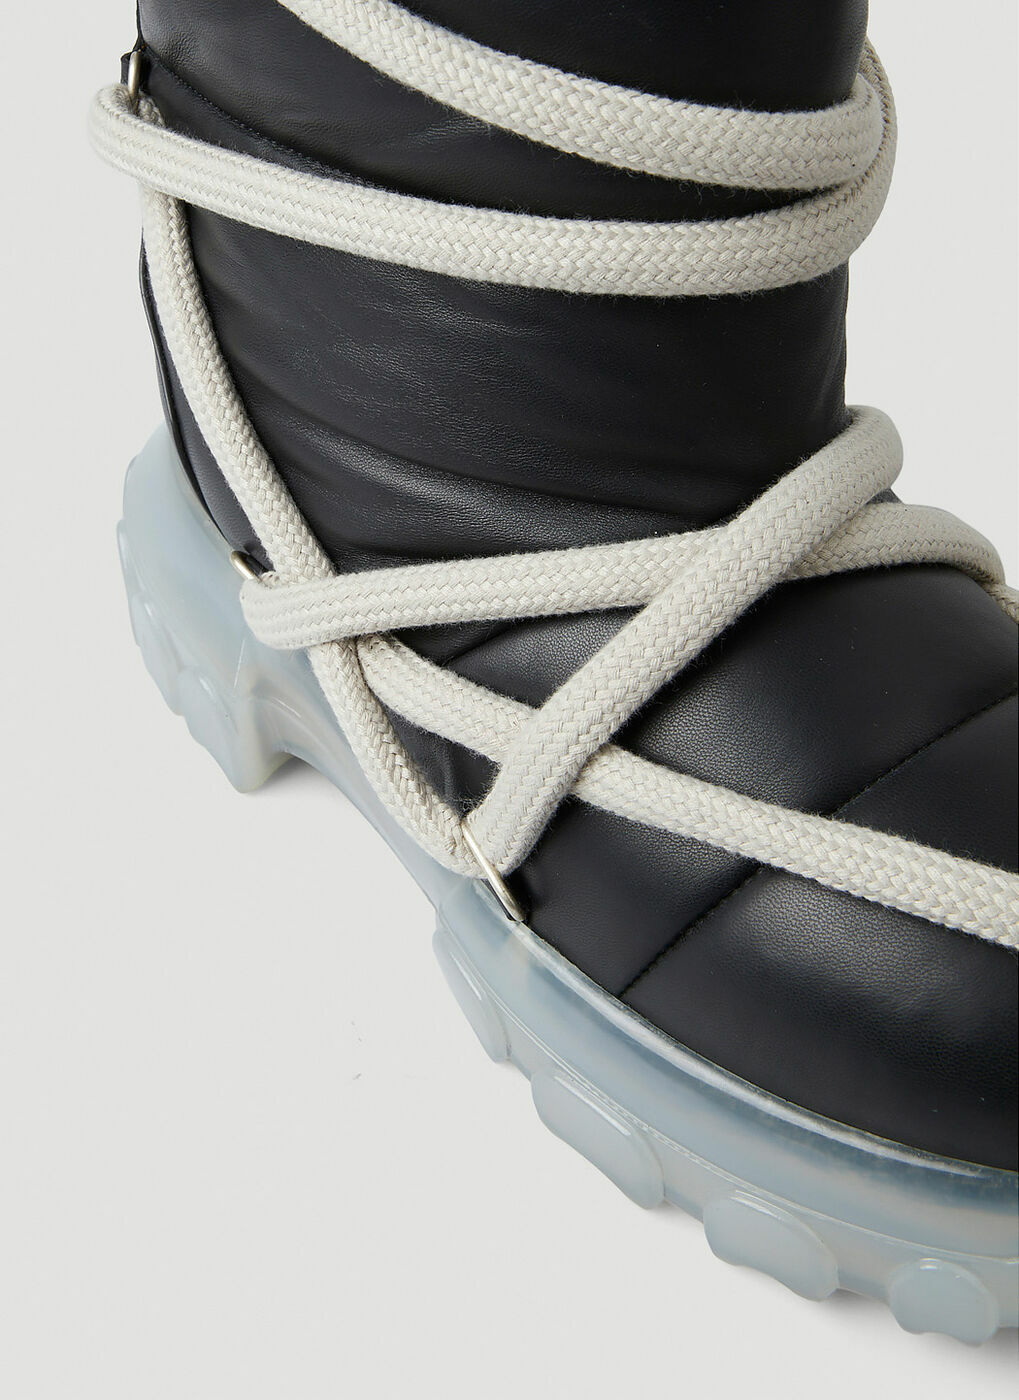 Rope Wrap Around Boots in Black